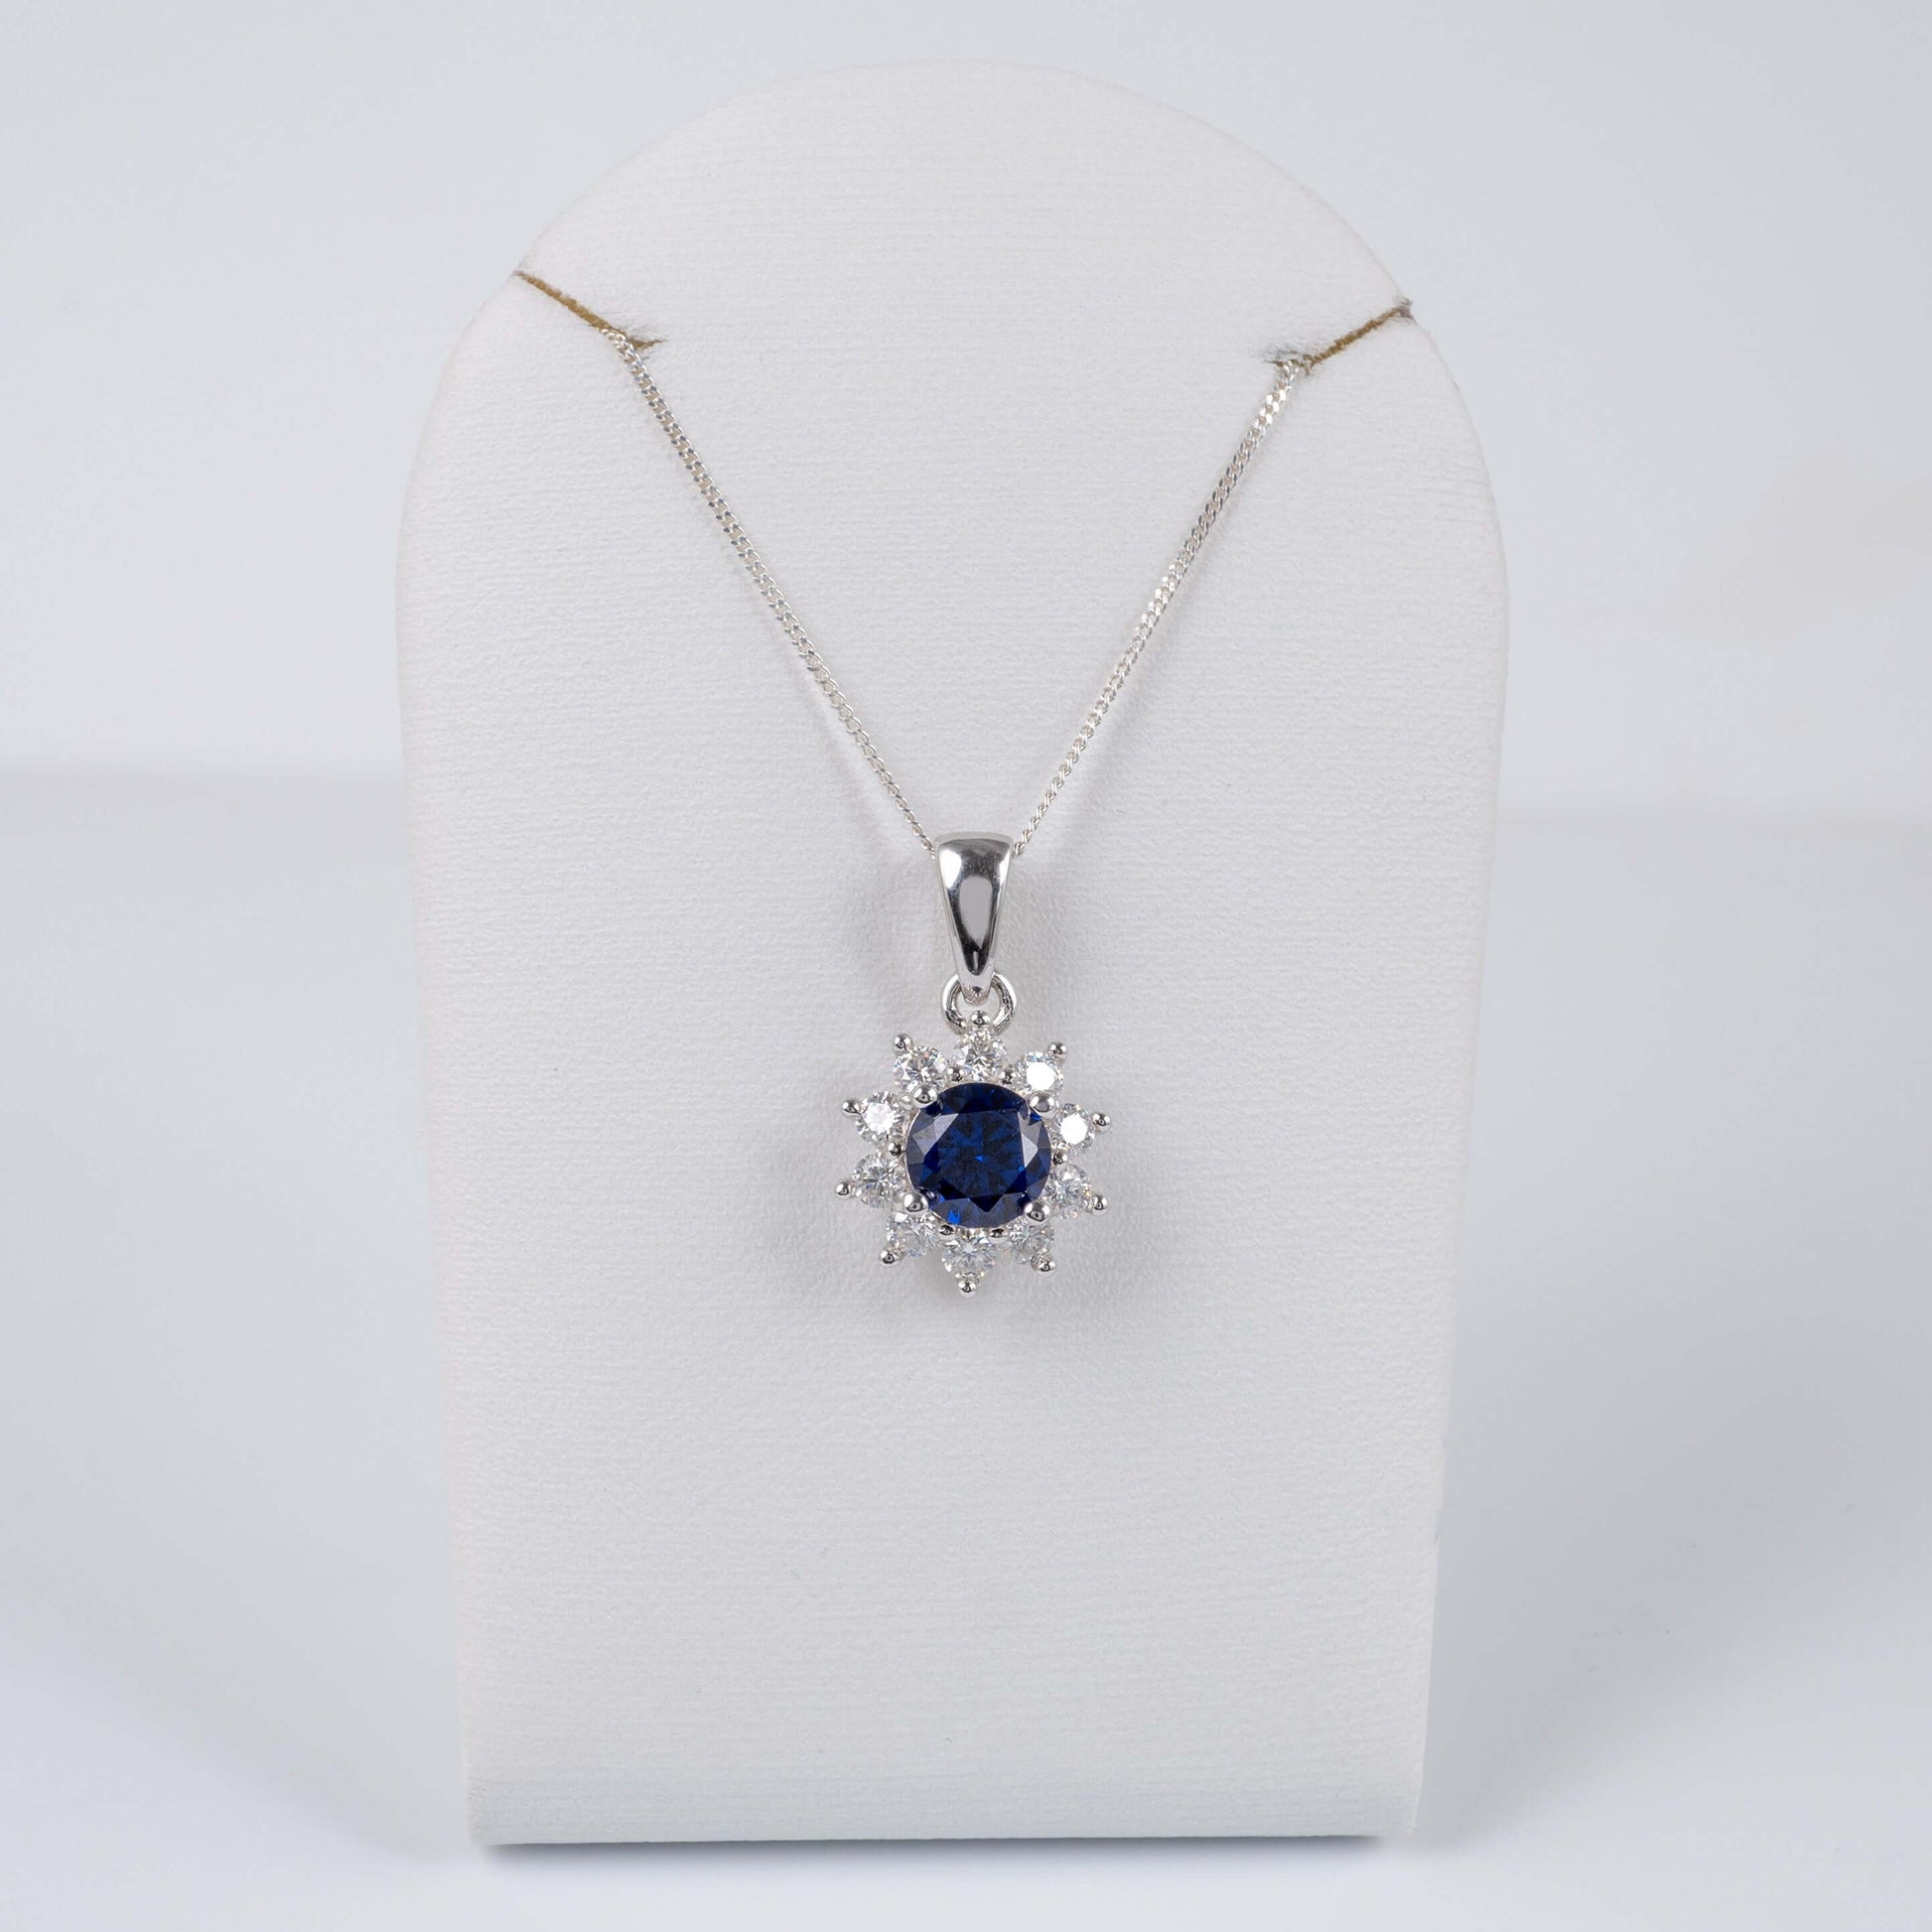 Sophisticated Silver Necklace Featuring Lab-Grown Sapphire